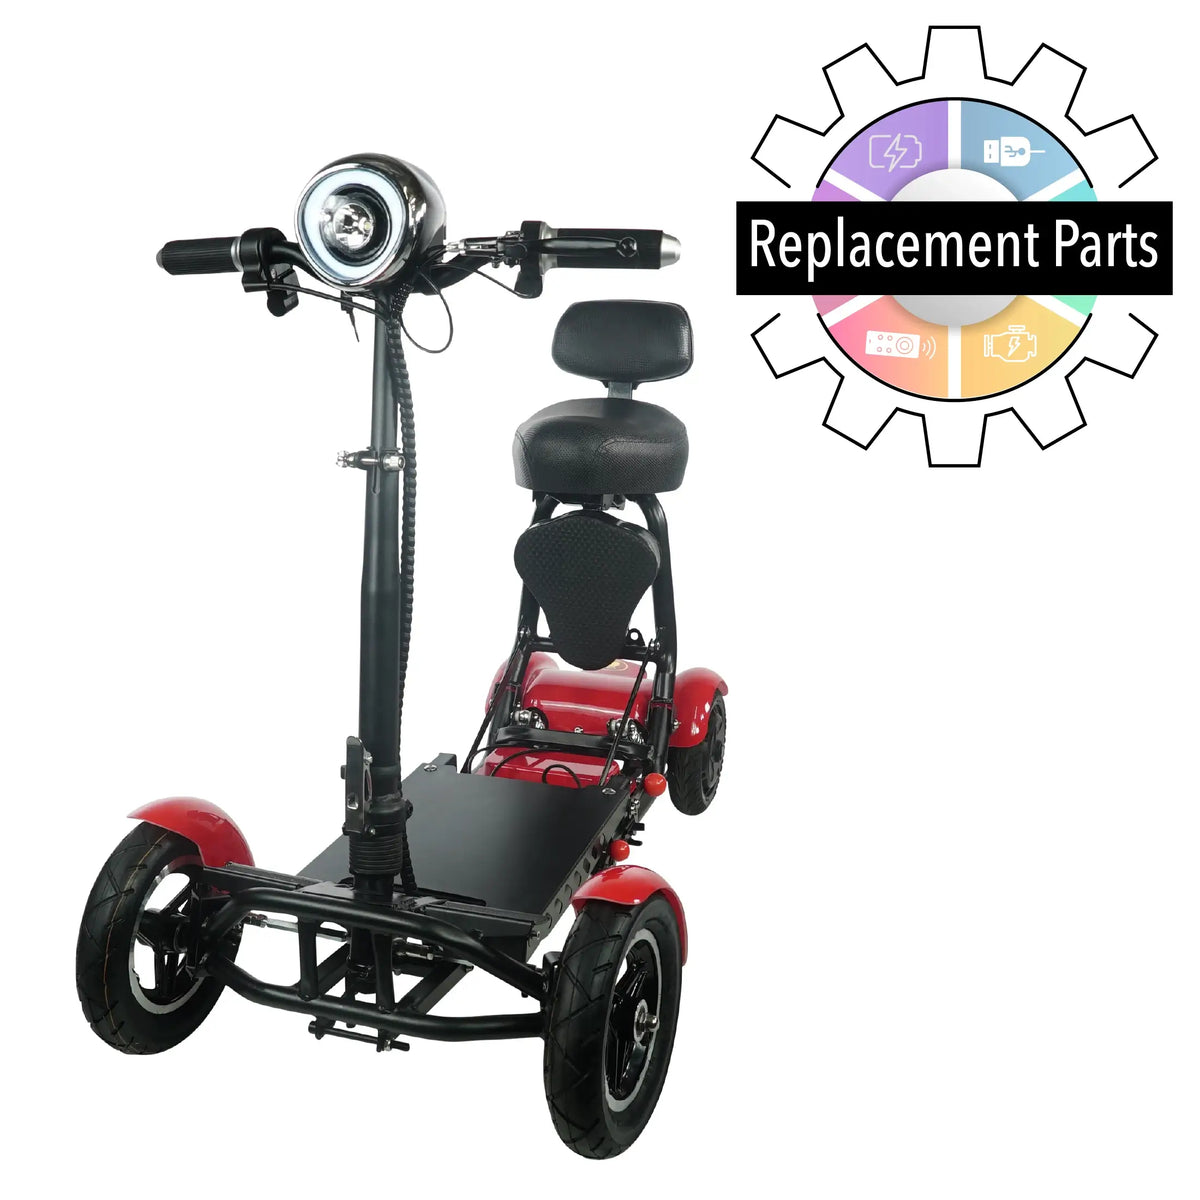 MS-3000 Mobility Scooter Replacement Parts